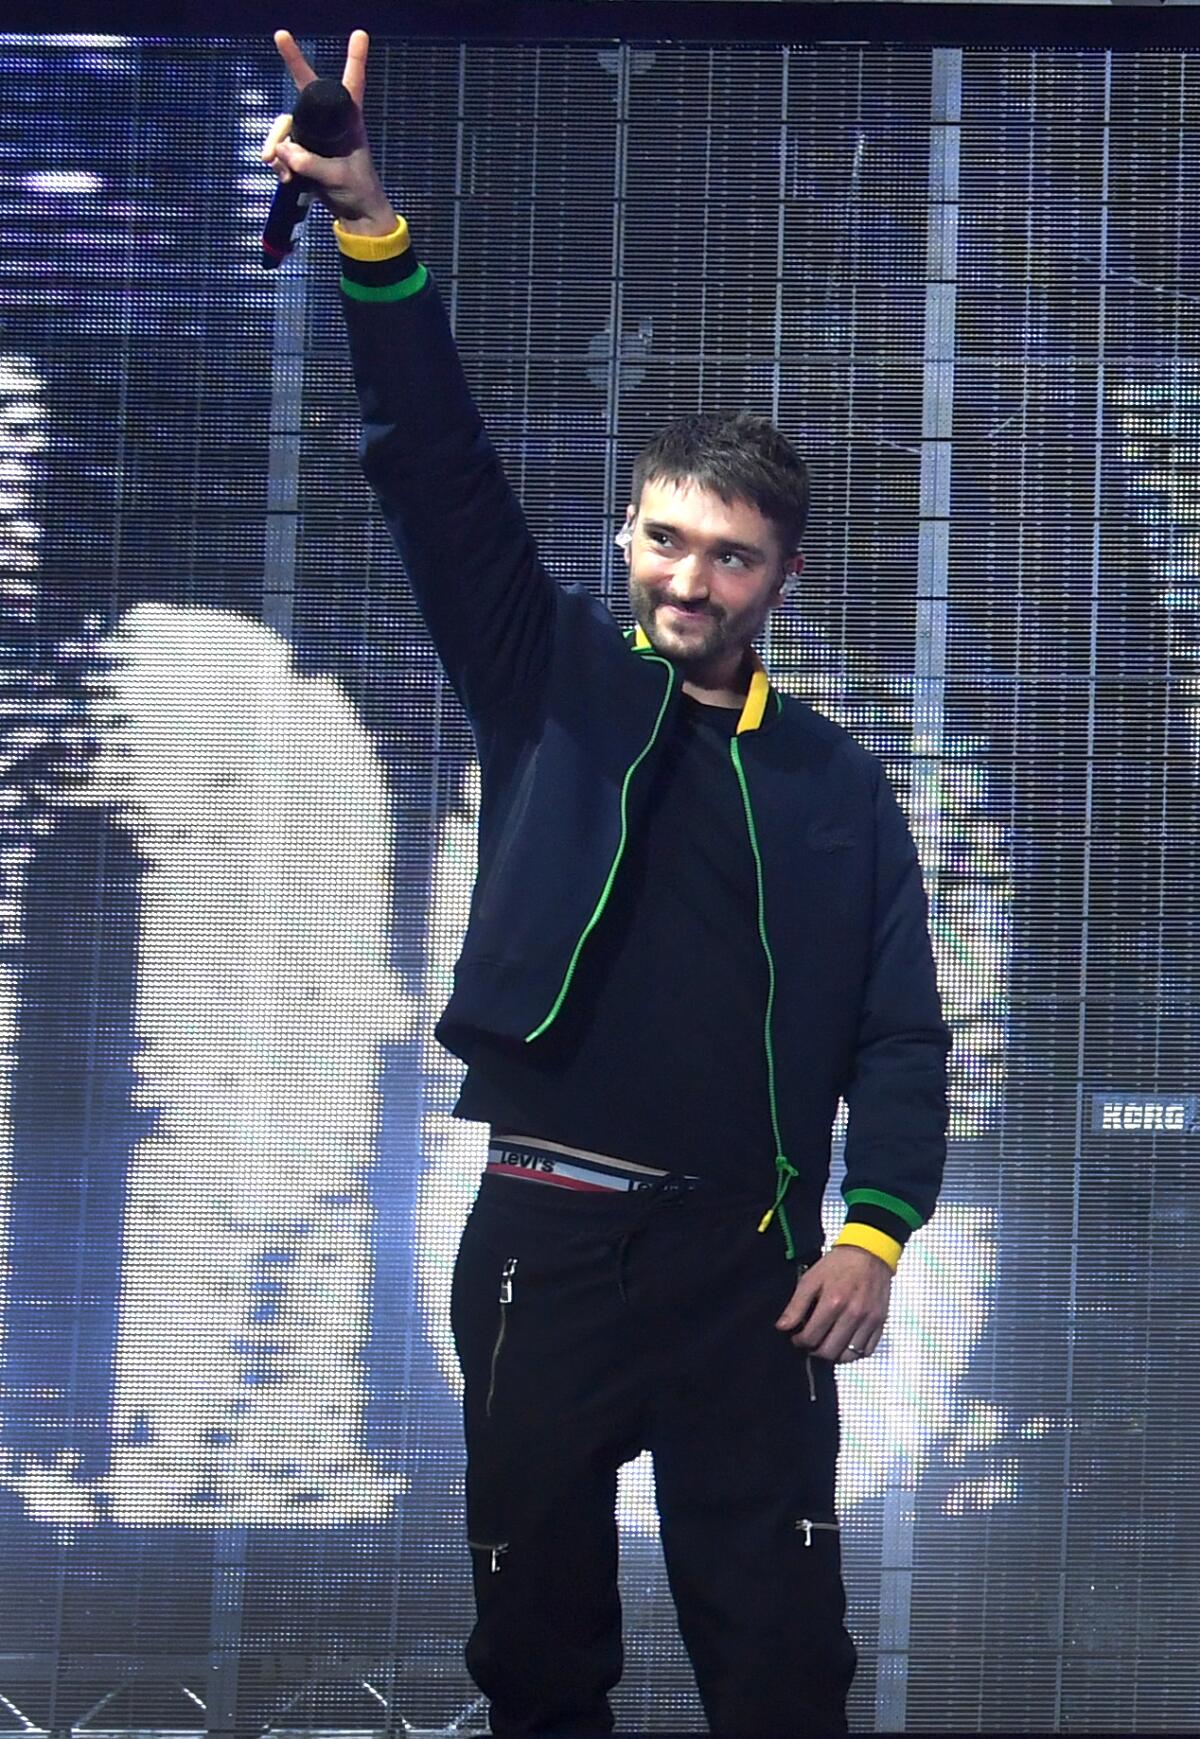 A man onstage holding a microphone up in the air